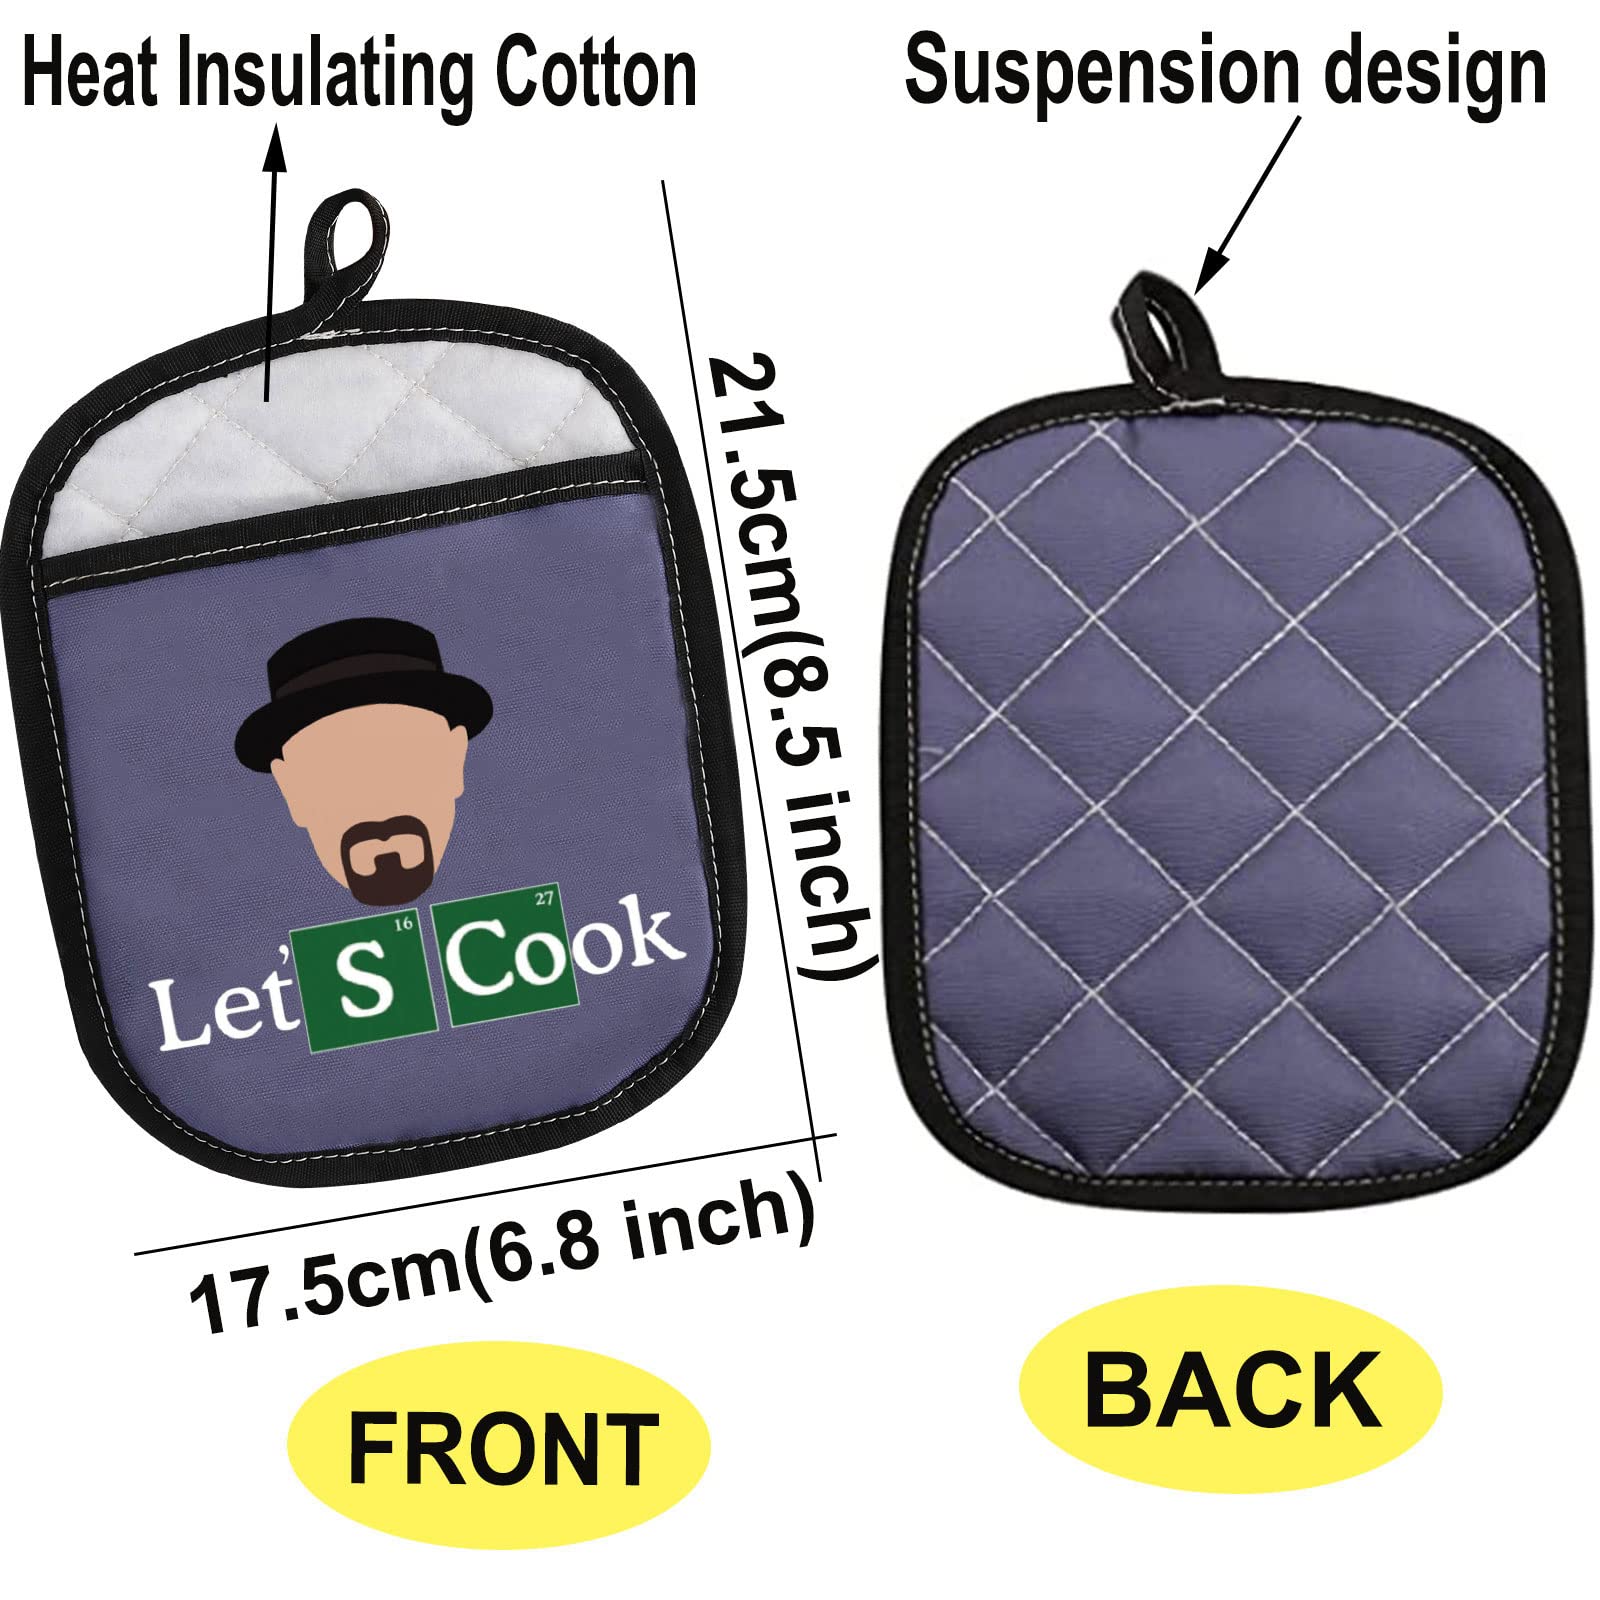 WZMPA Crime TV Show Pot Holders TV Show Fans Gifts TV Show Oven Mitt with Hot Pads Let's Cook Grilling BBQ Gloves for Friend Family (Let Cook Holder)